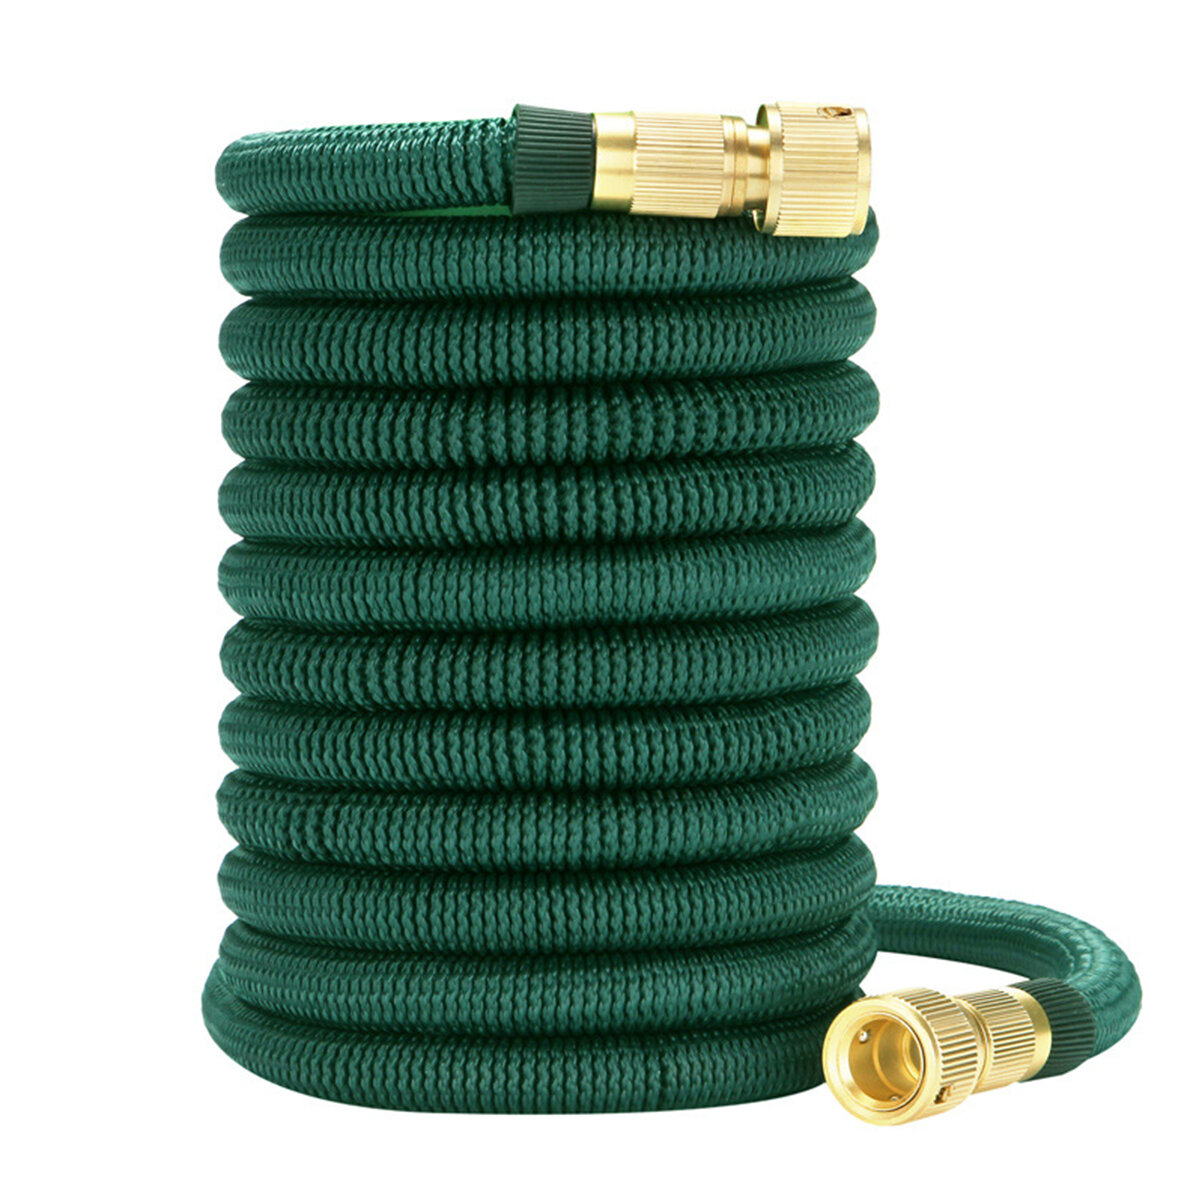 Dark Green Expandable Flexible Water Hoses Telescopic Pipe Full Copper Connector for Car Wash Tool